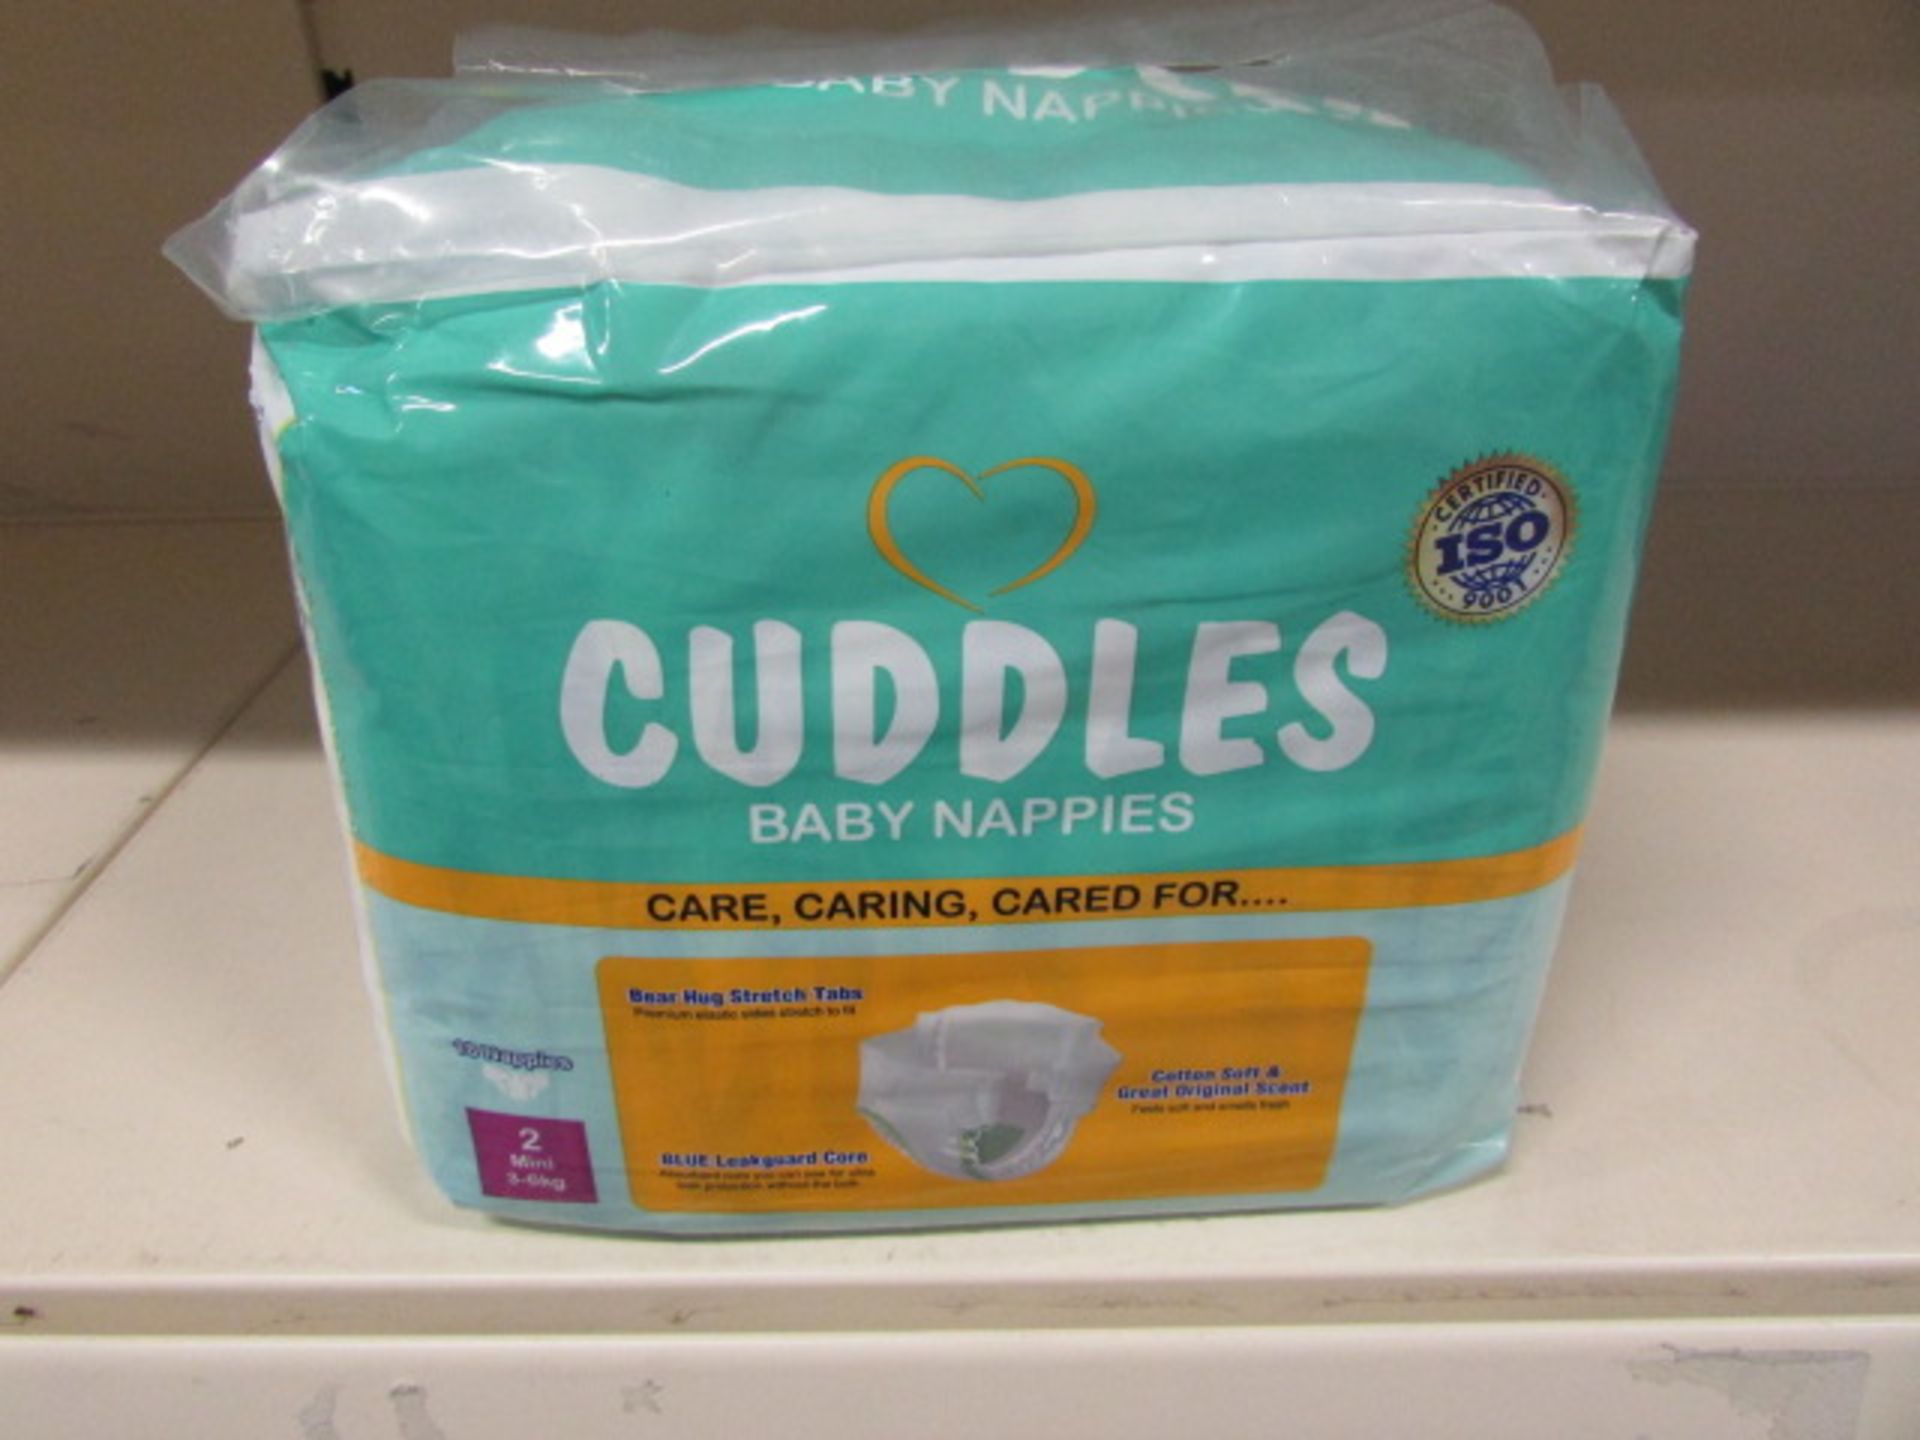 10 x Outer Carton, 10 Packs In An Outer, 18 Nappies in A Pack (1,800 Nappies In Total) [Size 3] - Image 4 of 6